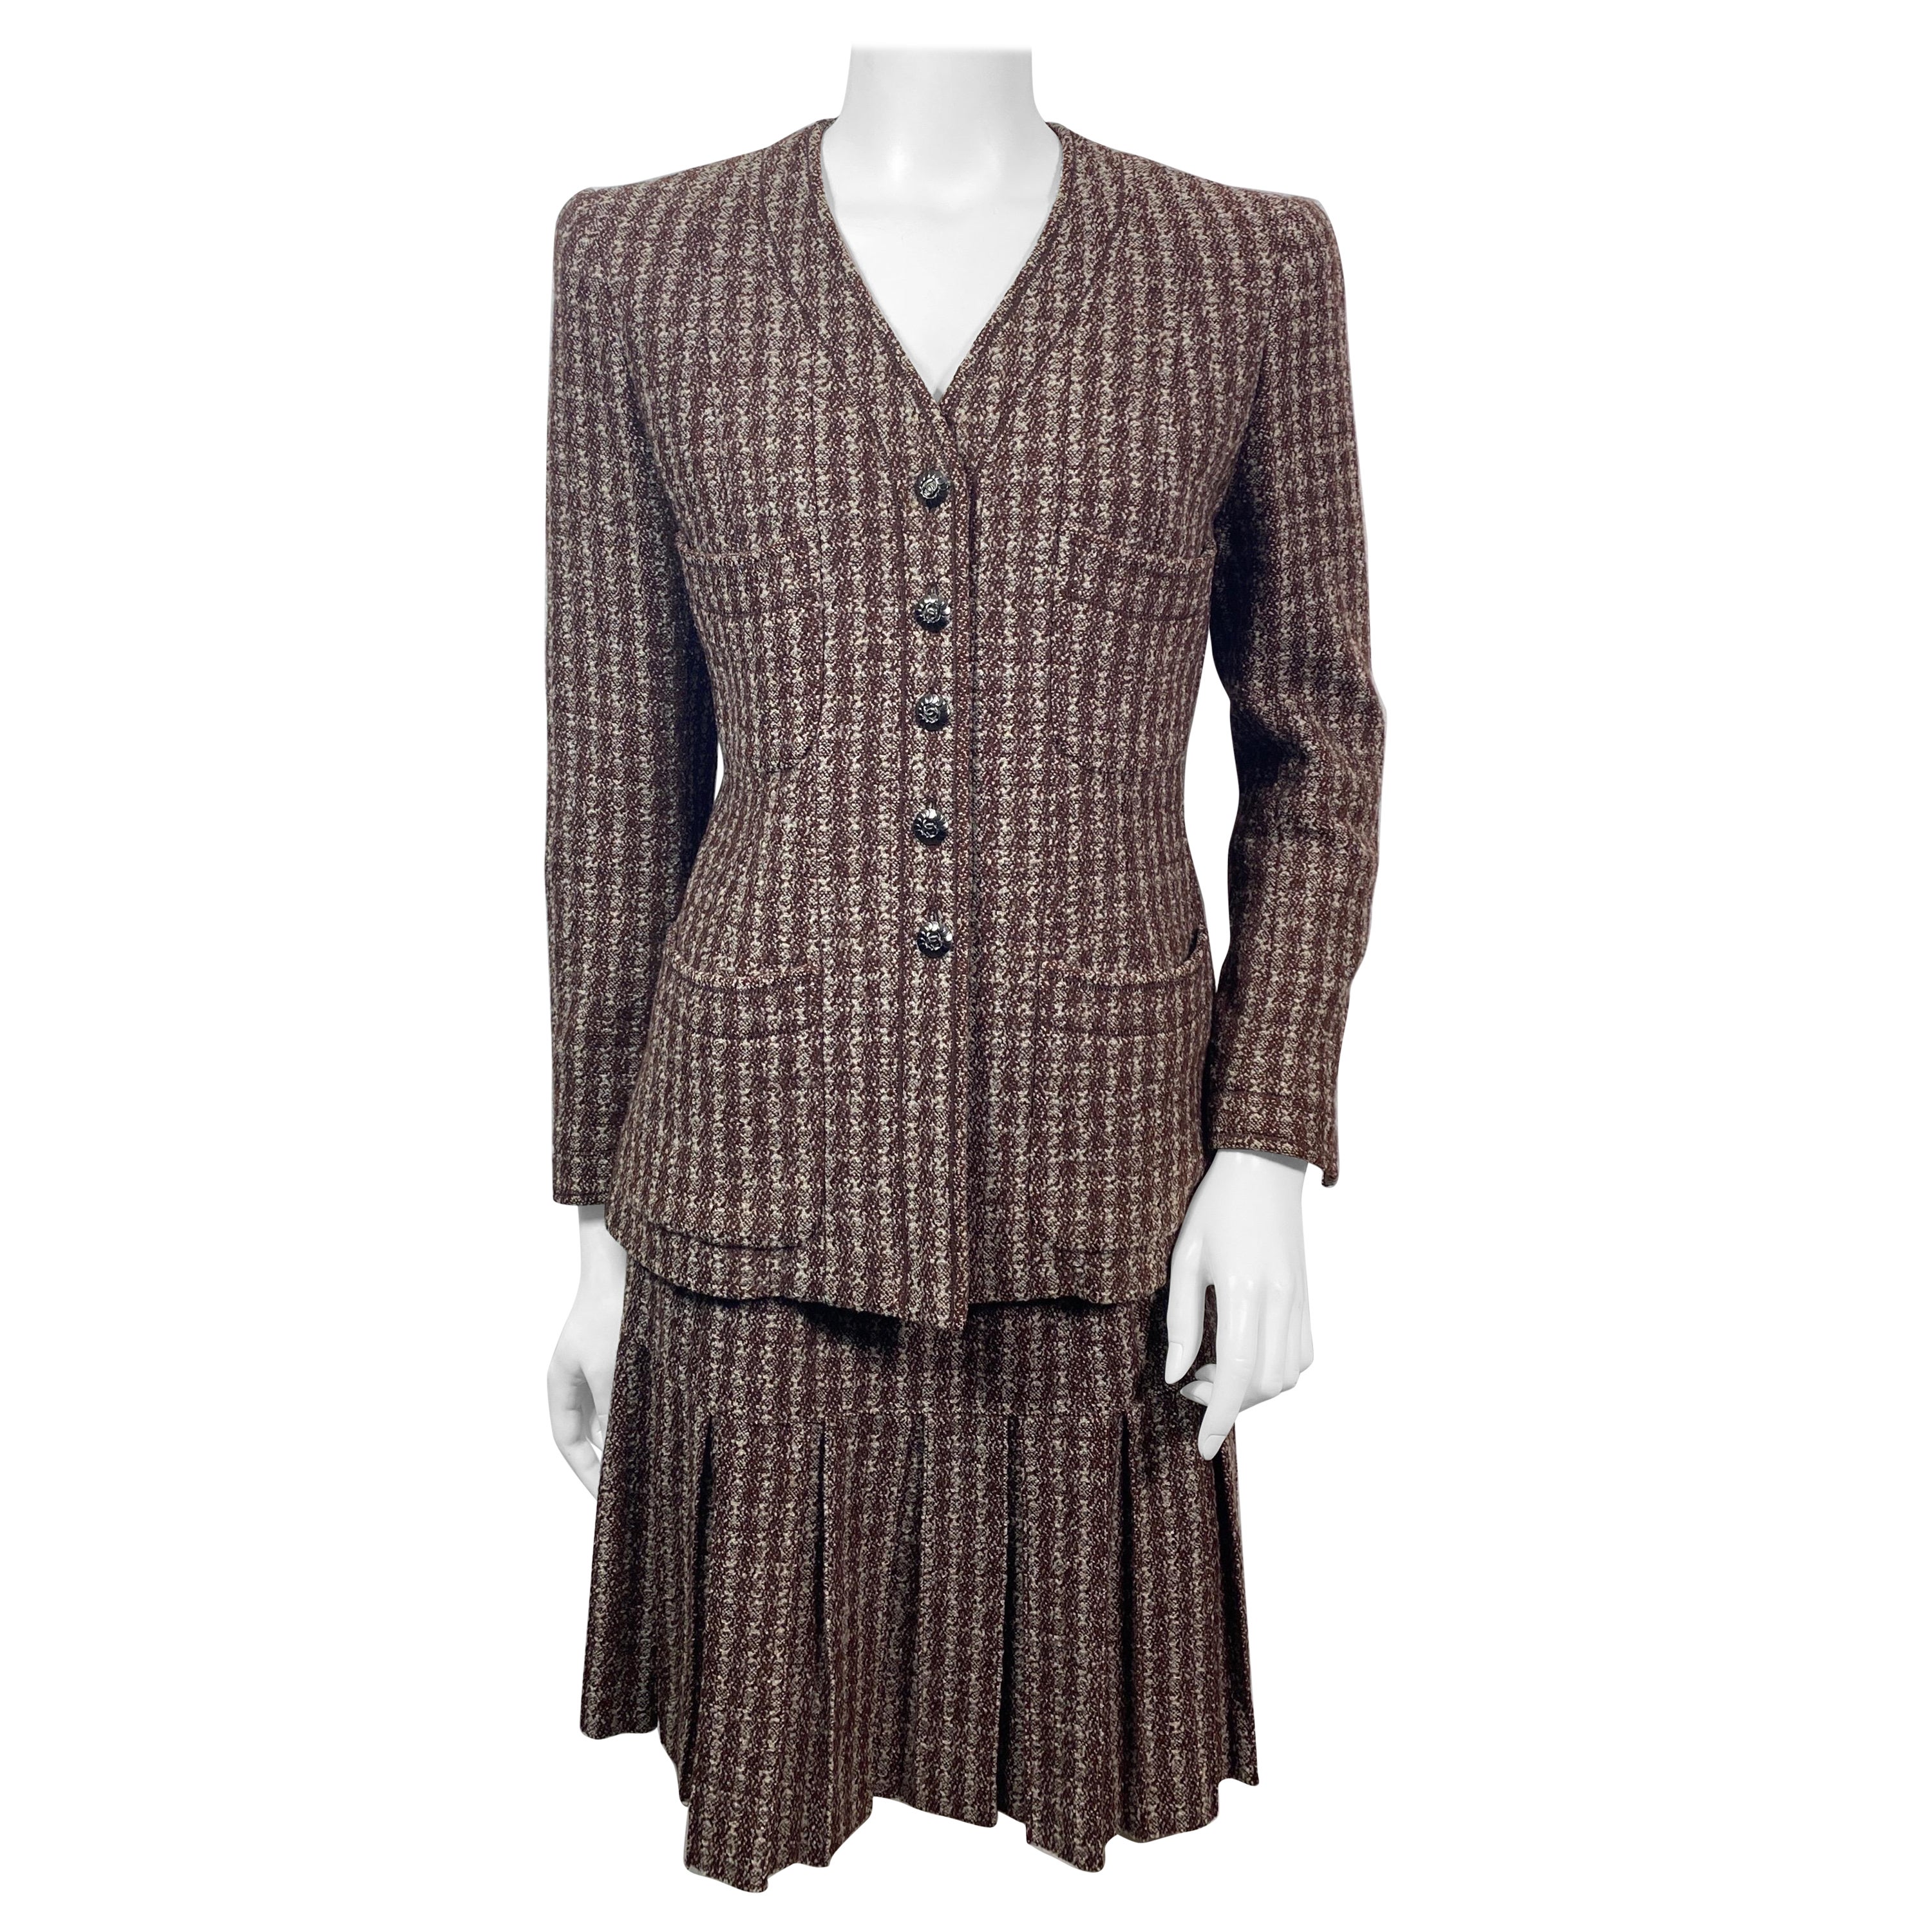 Chanel 1990’s Brown and Crème Wool Nailshead Tweed Skirt Suit-size 36 For Sale